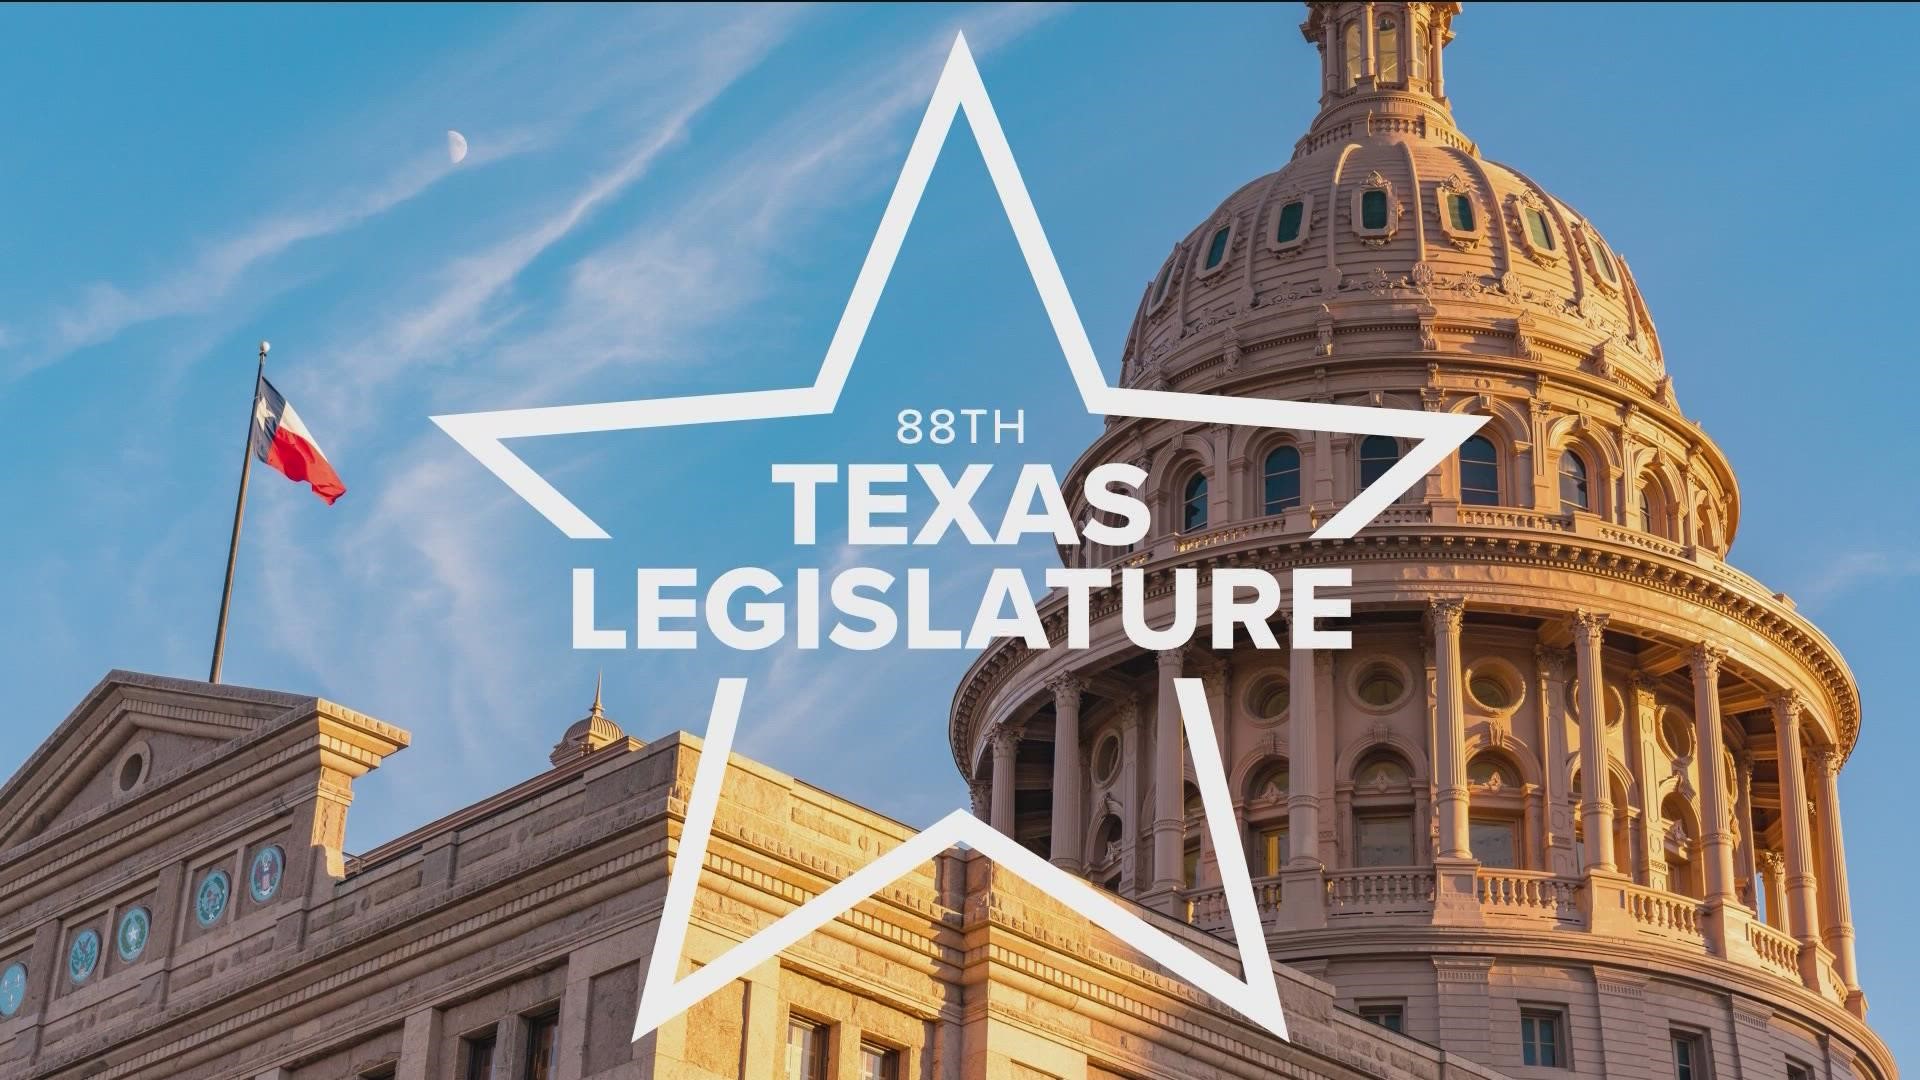 State Sen. Nathan Johnson is calling for an amendment to repeal language in the Texas Constitution that defines marriage as a union between one man and one woman.